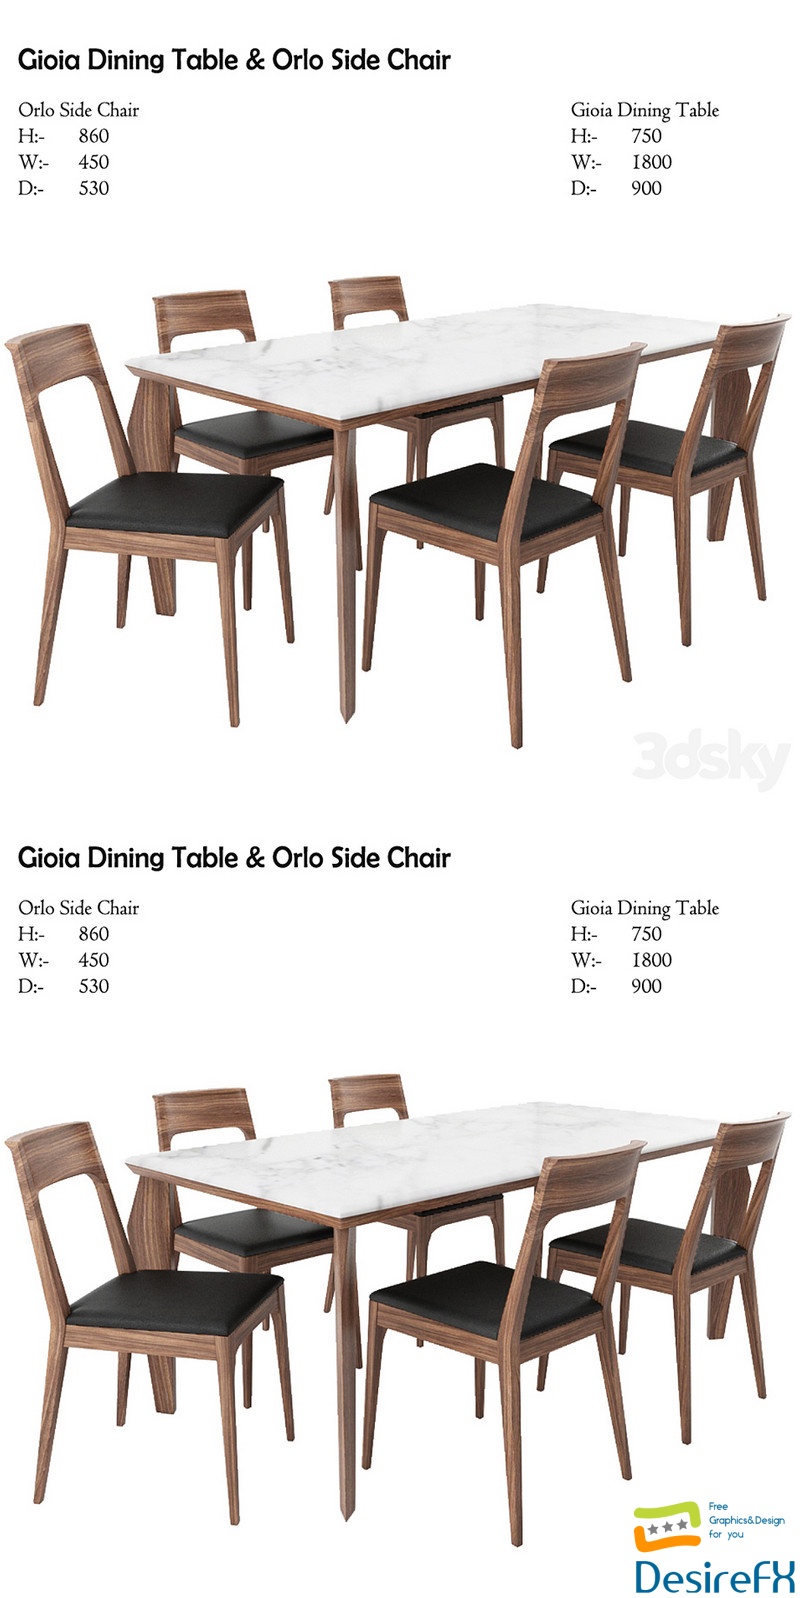 Gioia Dining Table & Orlo Side Chair 3D Model